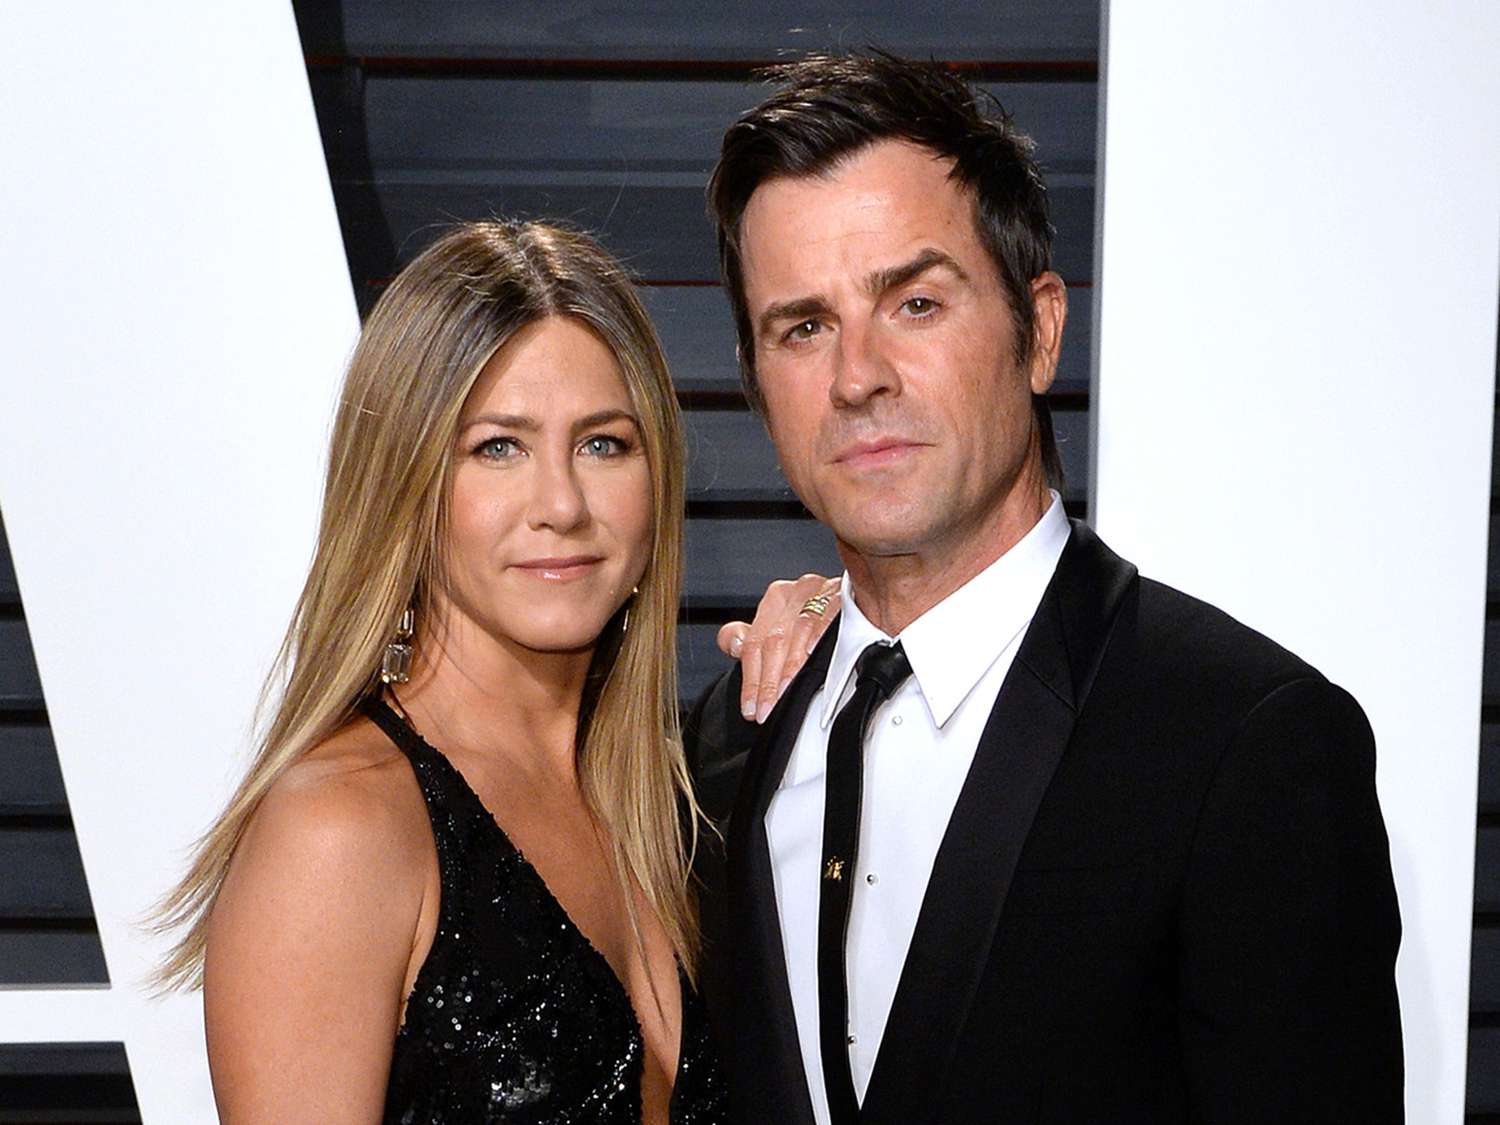 de tox recommends Jennifer Aniston Getting Fucked